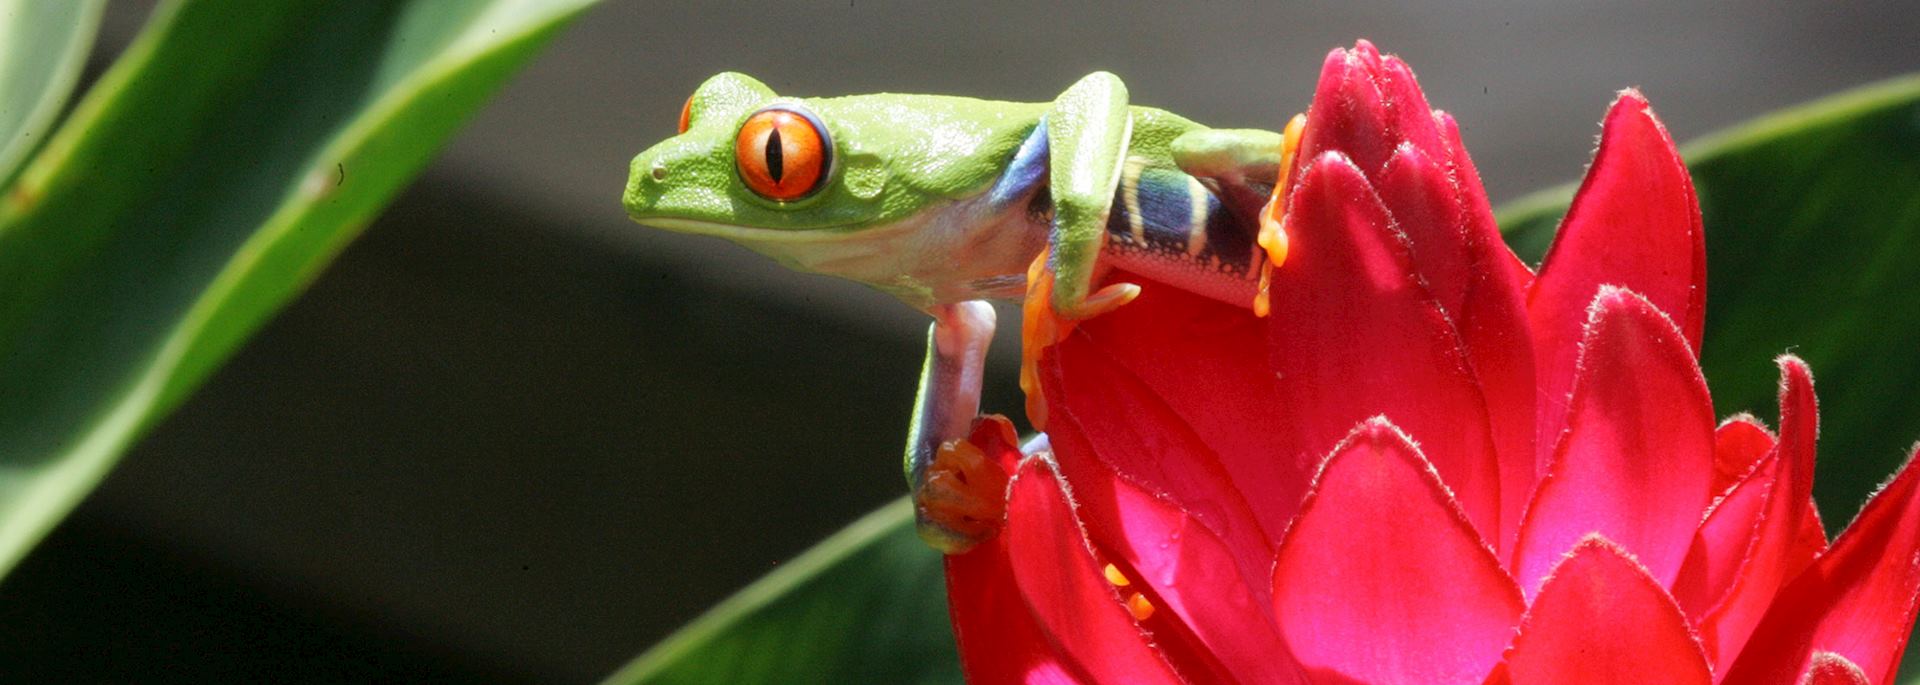 Red-eyed tree frog, Costa Rica